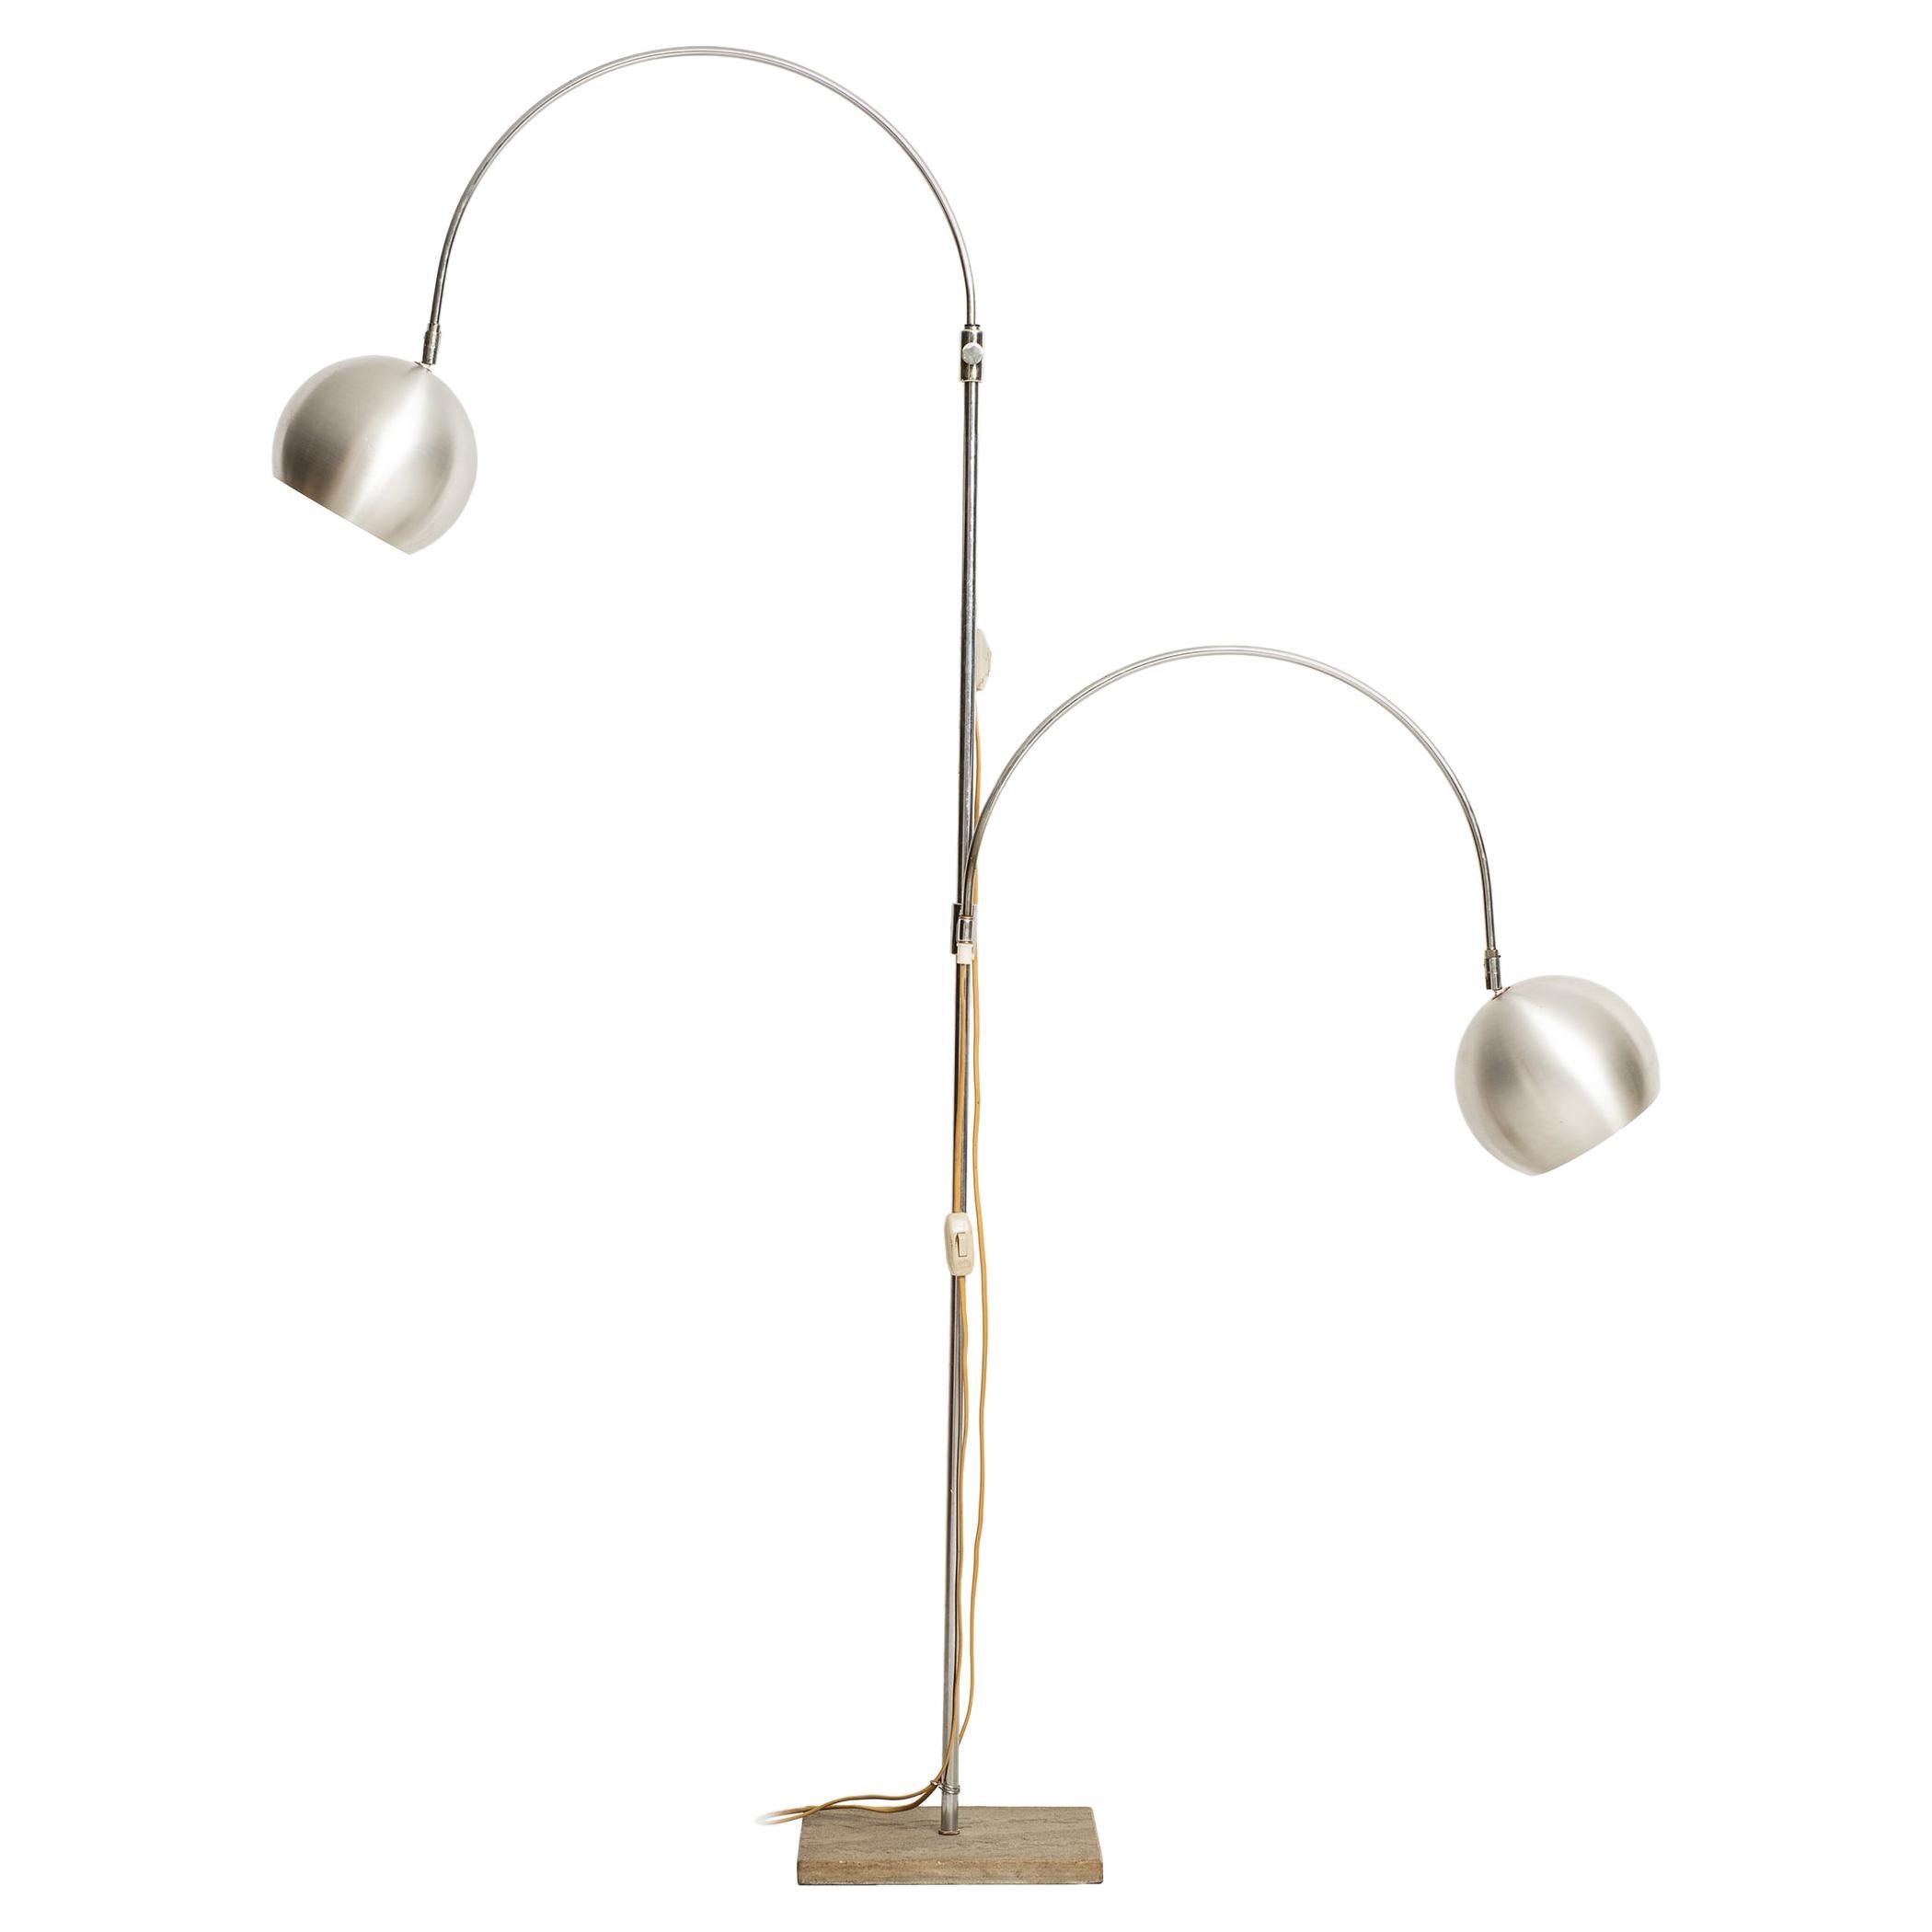 Large Floor Lamp With 2 Flexible Arms Produced In Italy For Sale At 1stdibs  | Floor Lamp With Flexible Arms, Flexible Floor Lamp, Bendable Floor Lamp Pertaining To 2 Arm Floor Lamps (View 3 of 15)